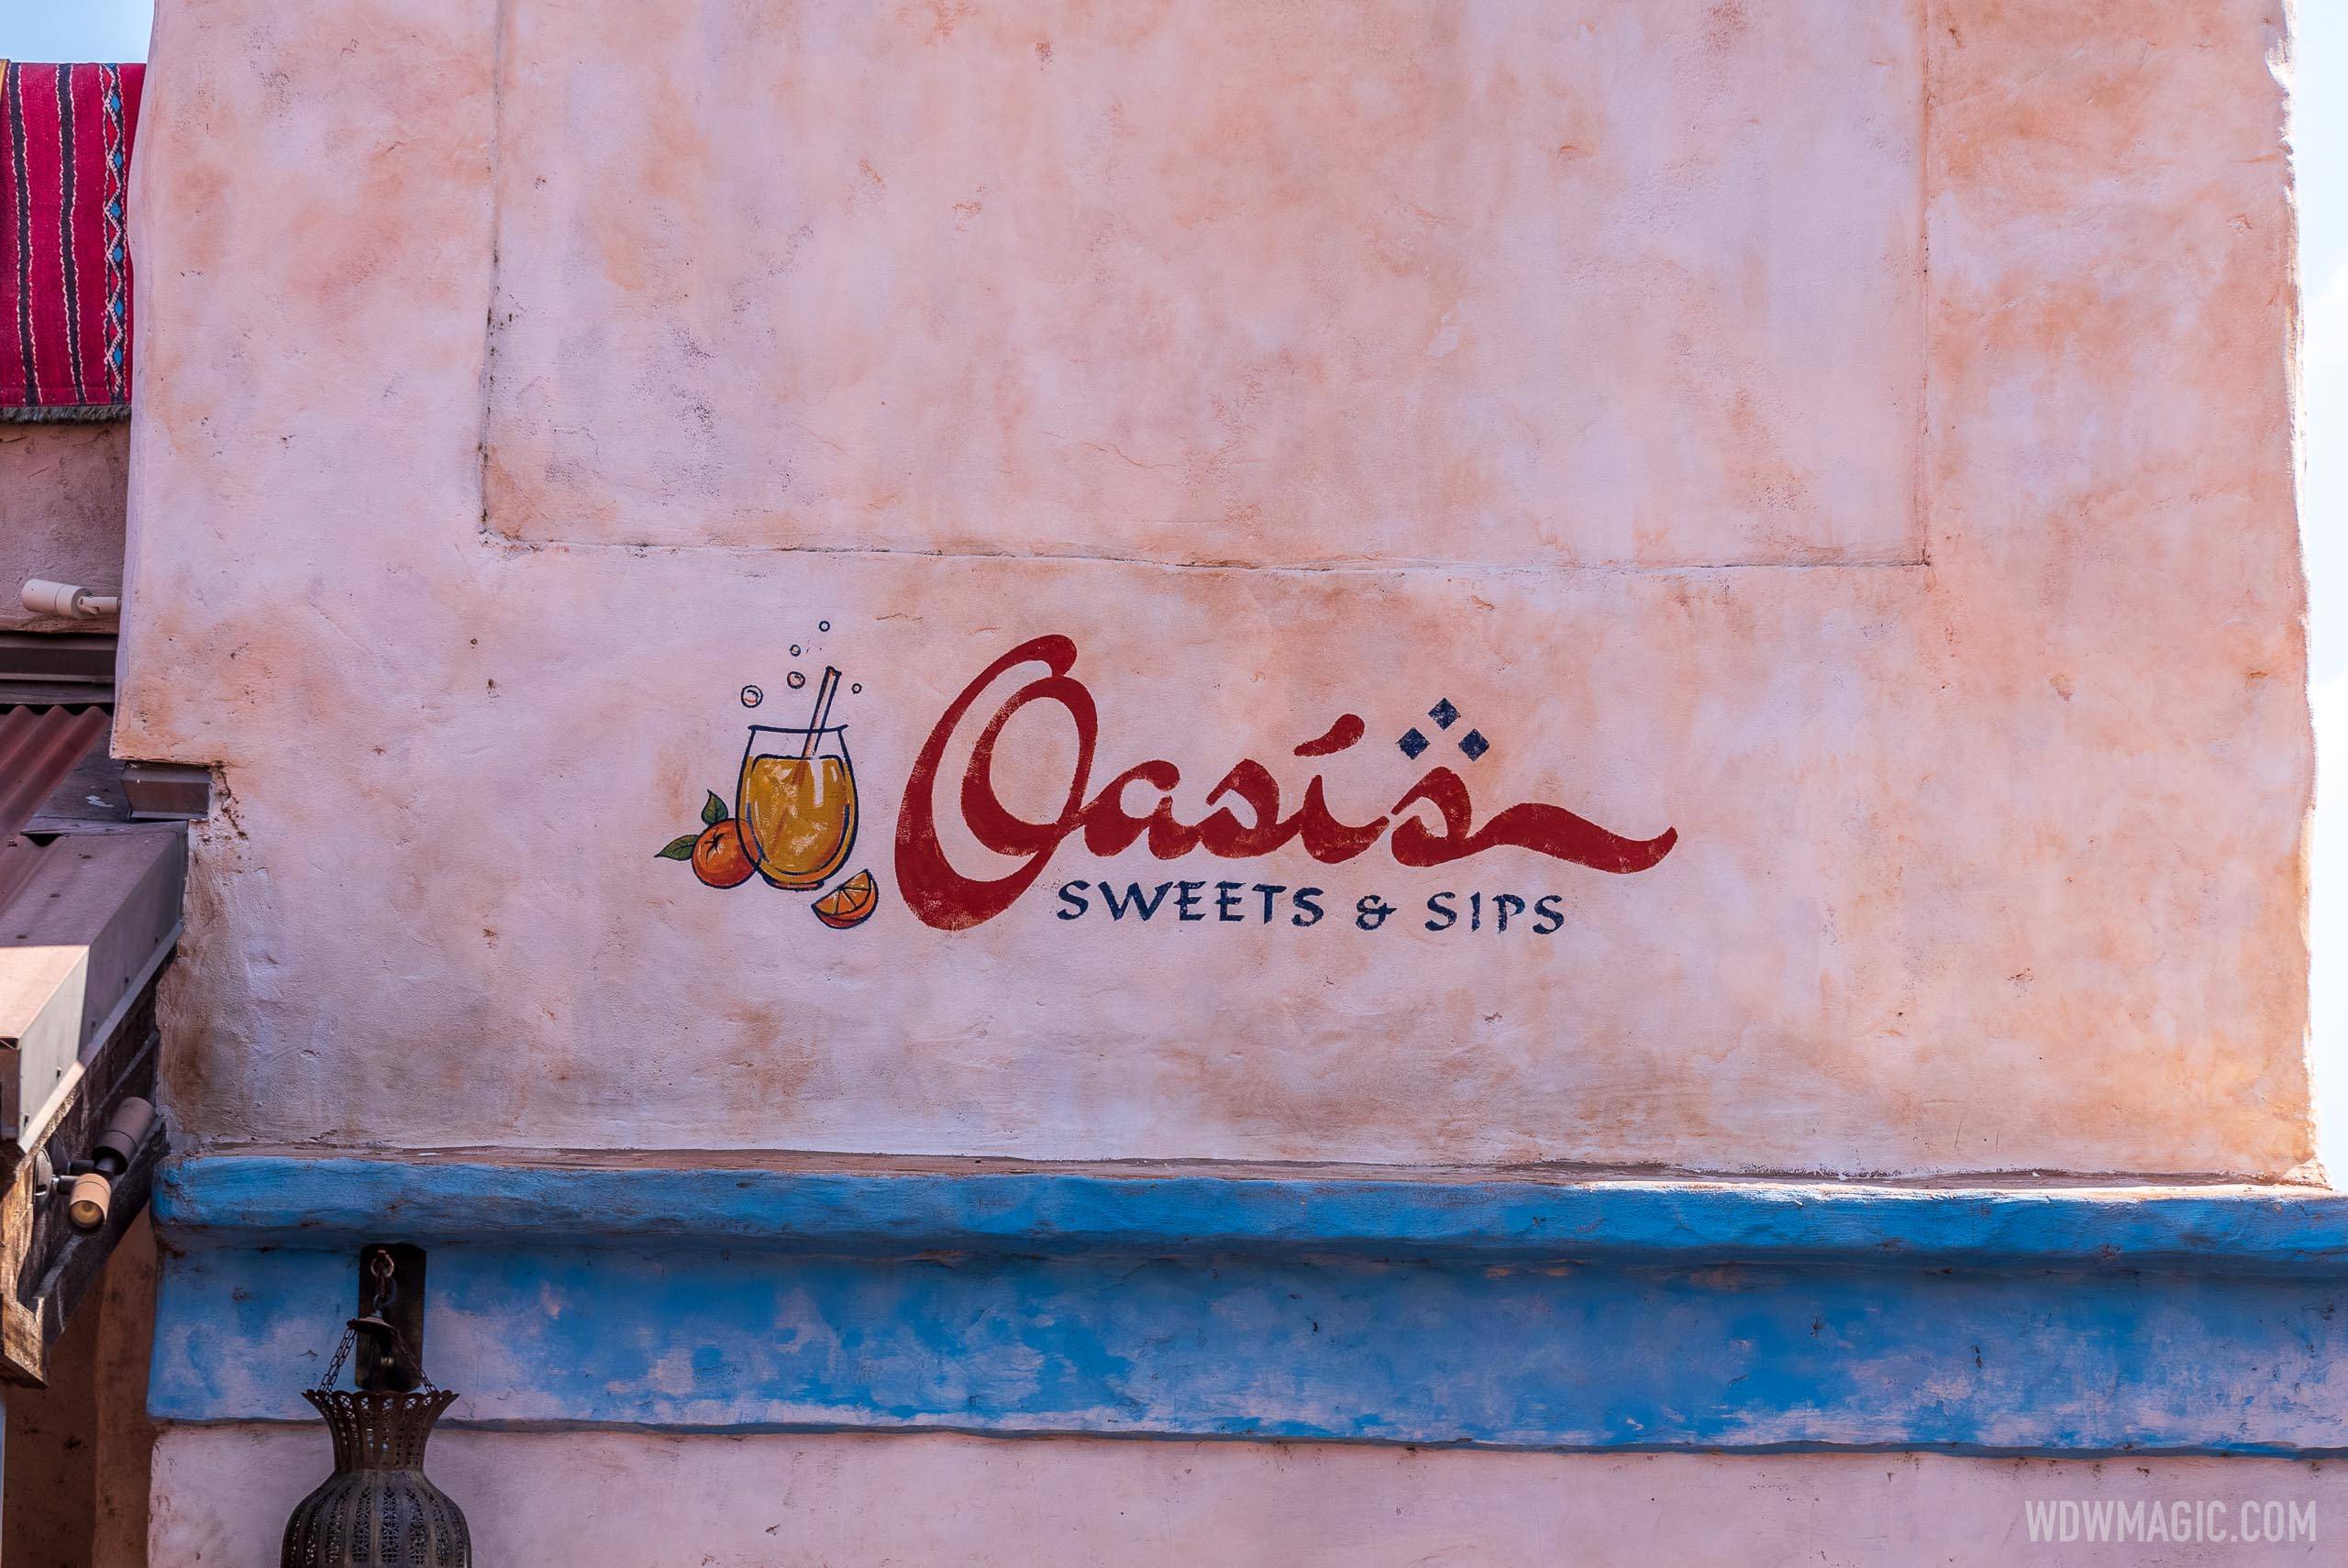 Oasis Sweets and Sips signage